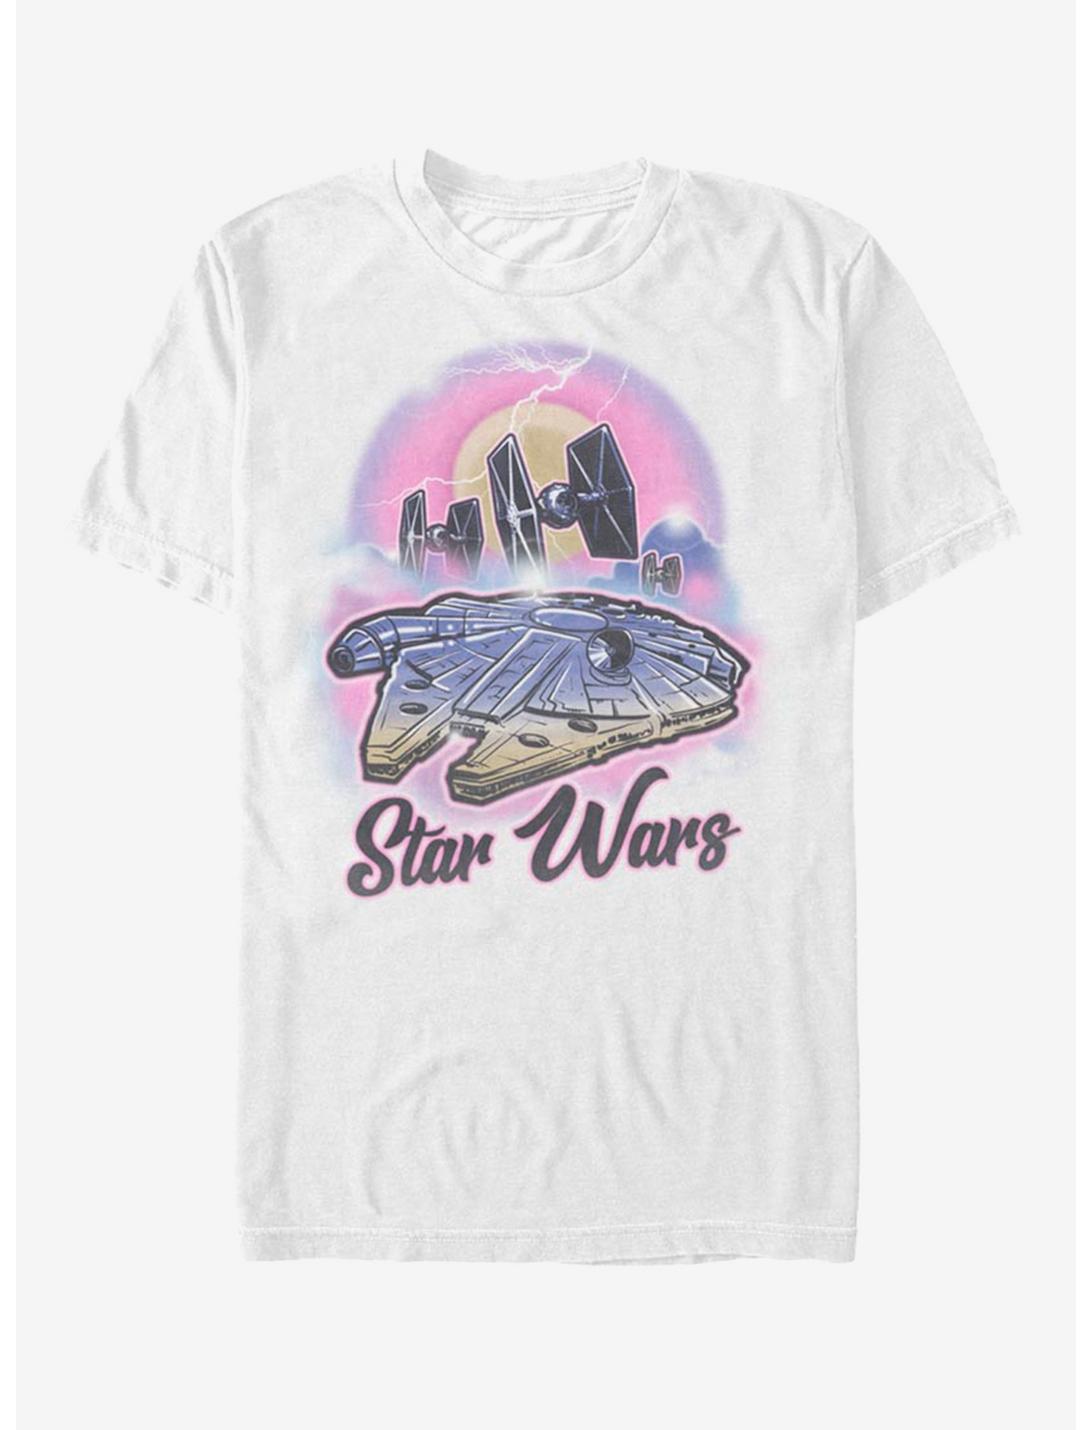 Star Wars In the Clouds T-Shirt, WHITE, hi-res